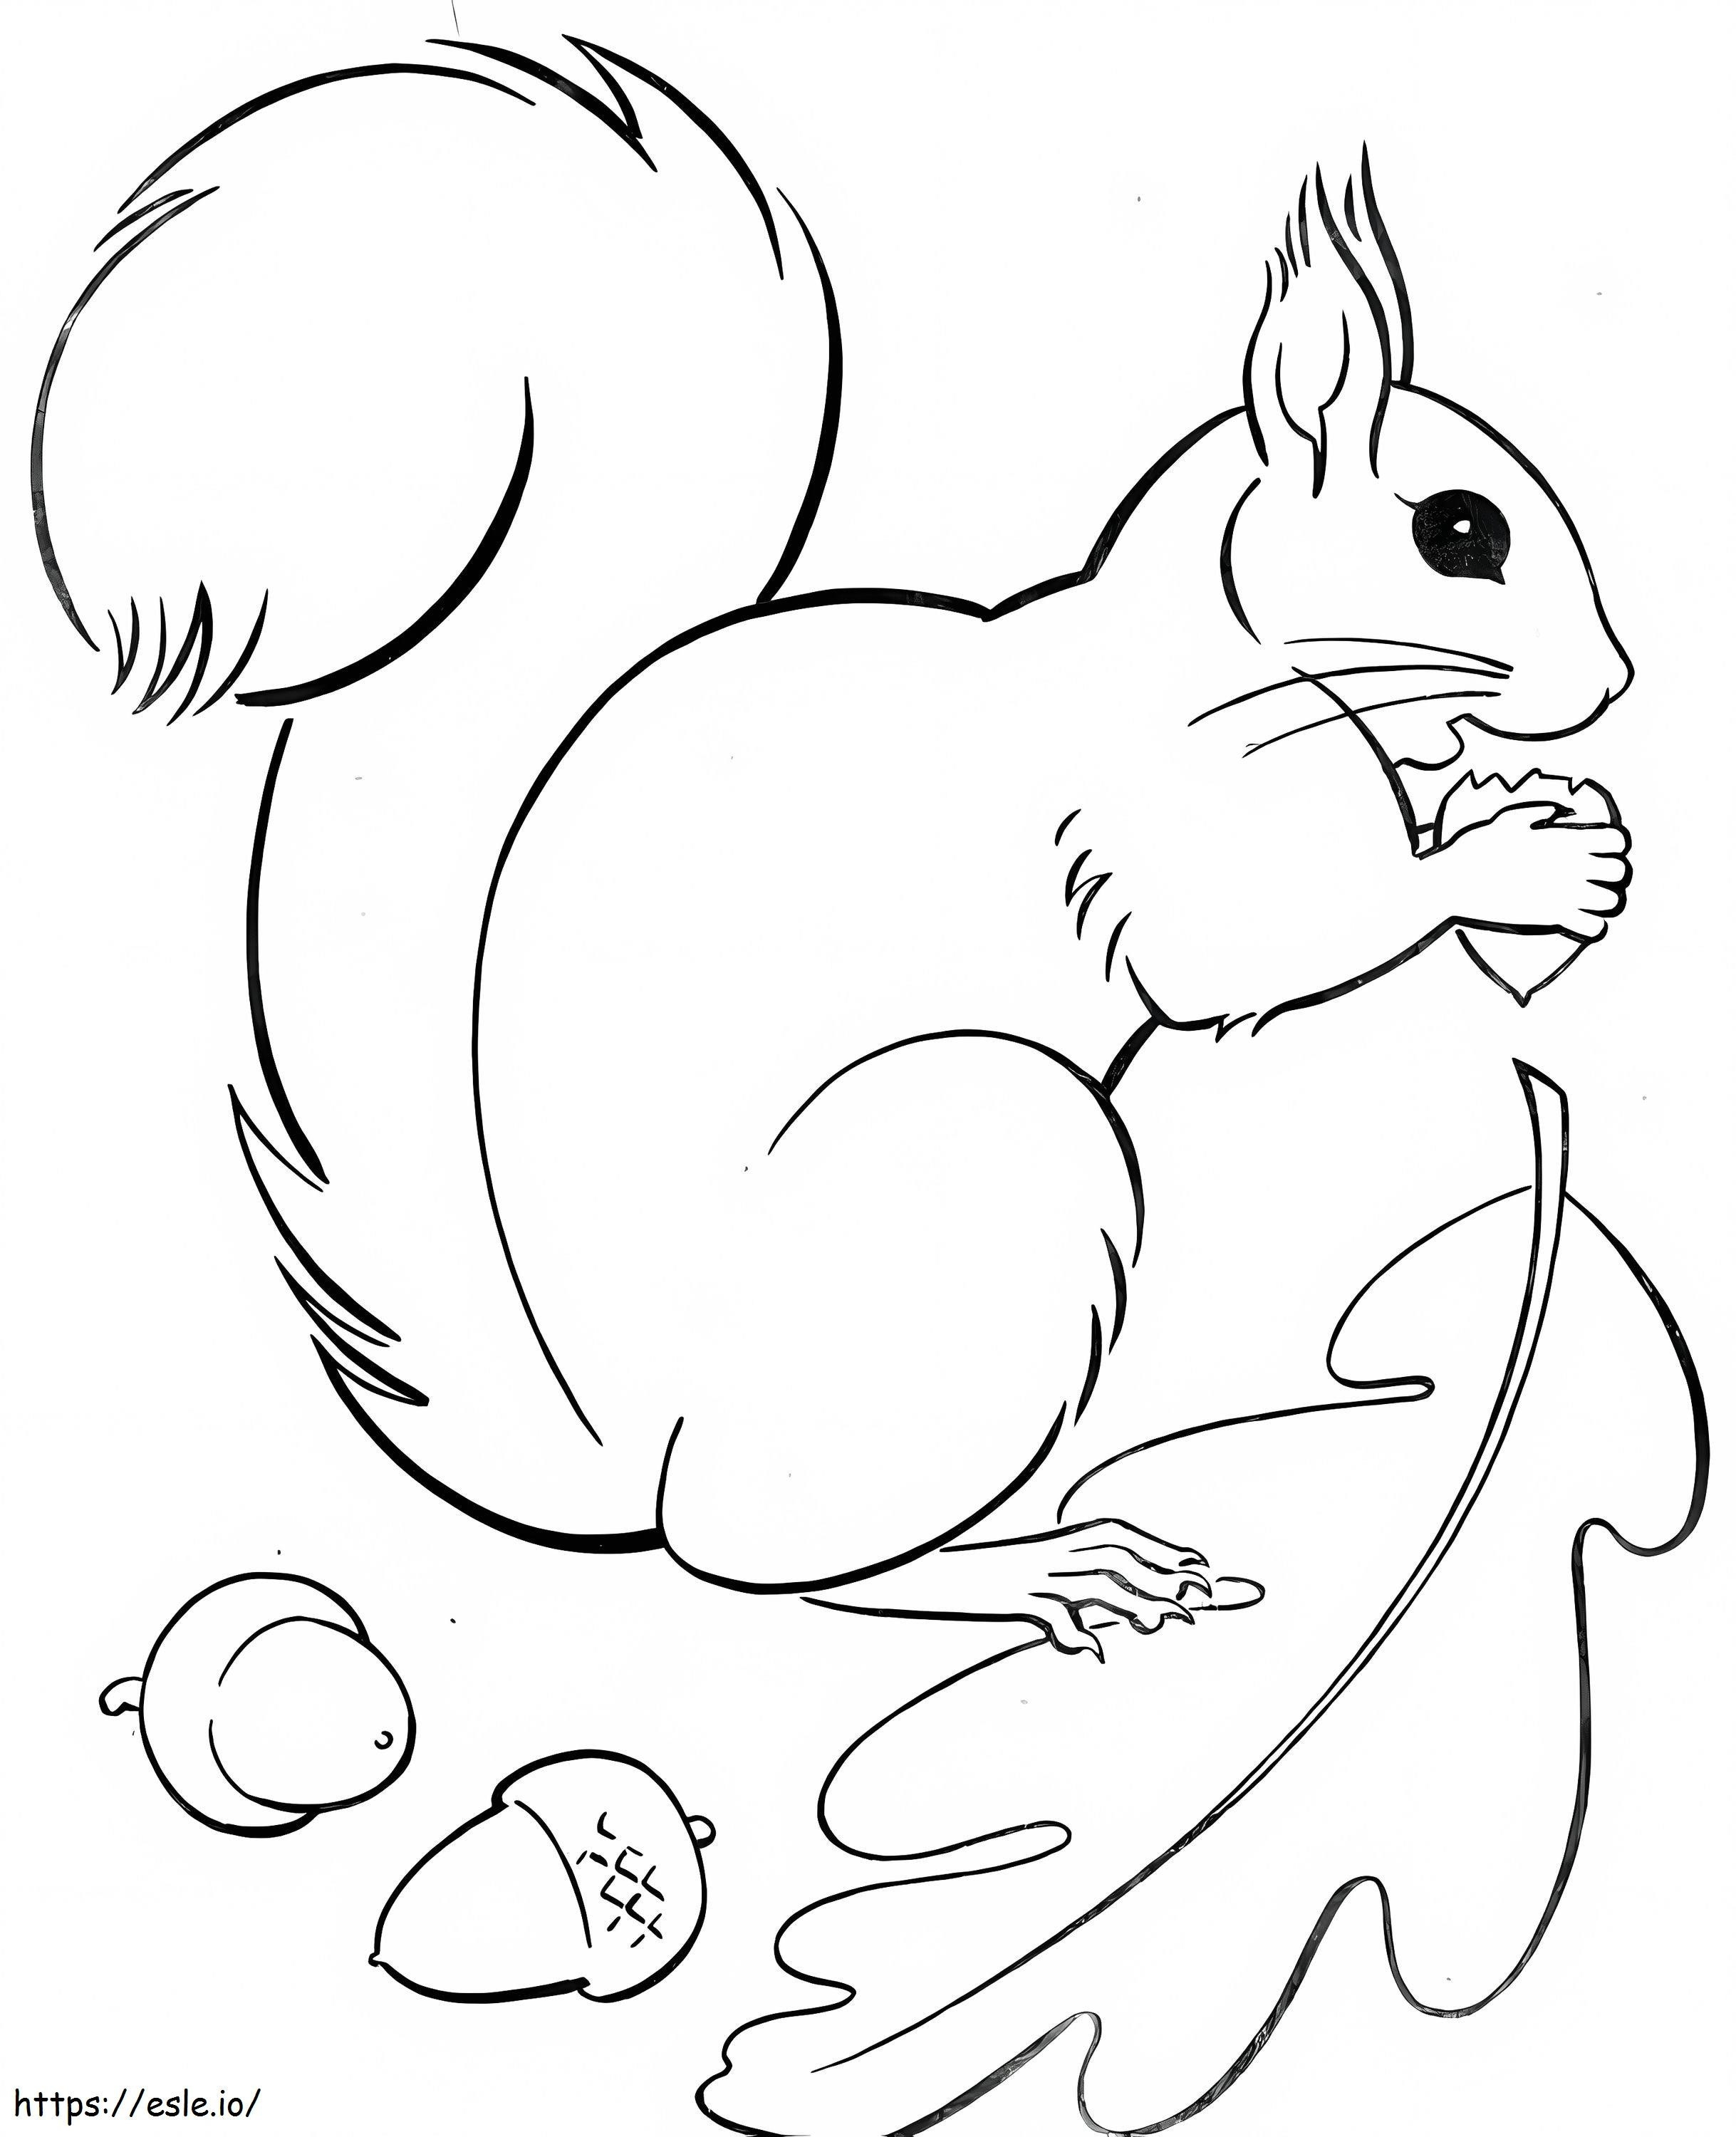 Squirrel And Acorn With Leaf coloring page